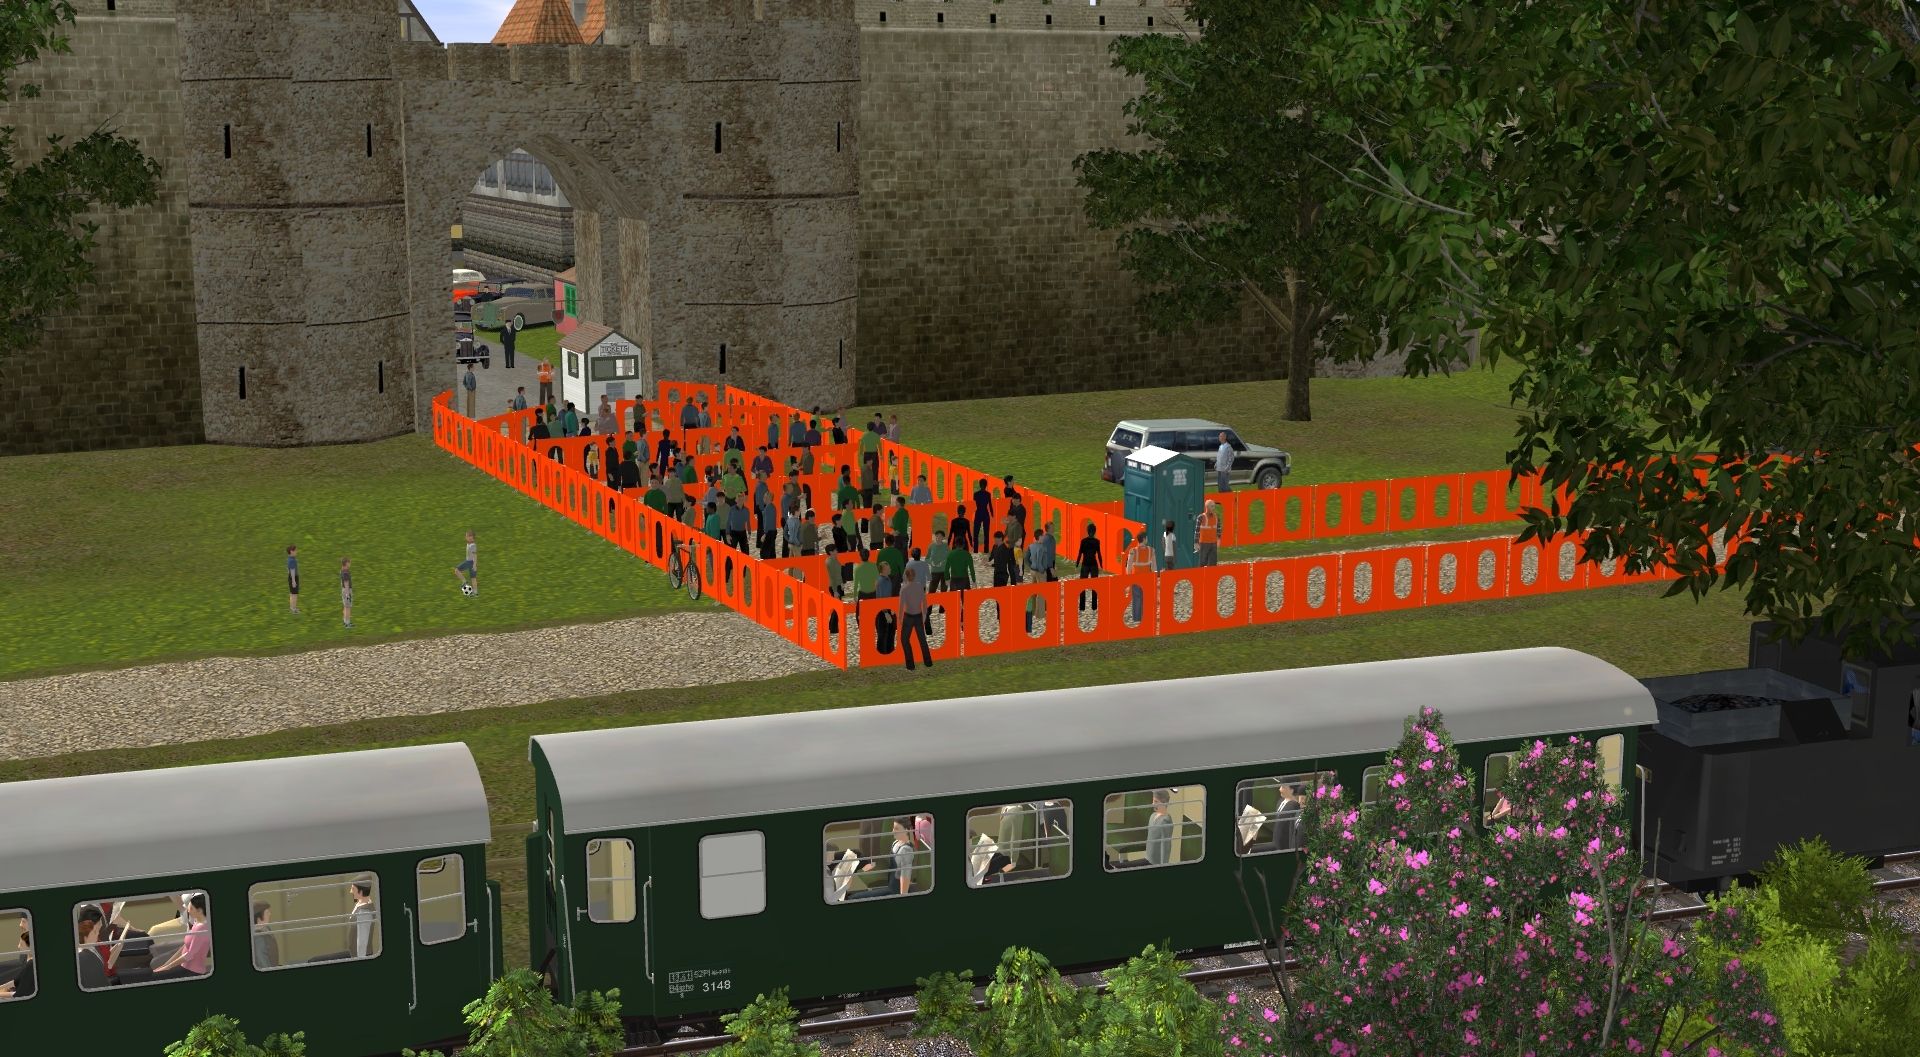 Crowd-control-barriers-in-use-at-the-castle-for-the-enthusiasts-who-were-waiting-for-the-vintage-car-show-to-open..jpg